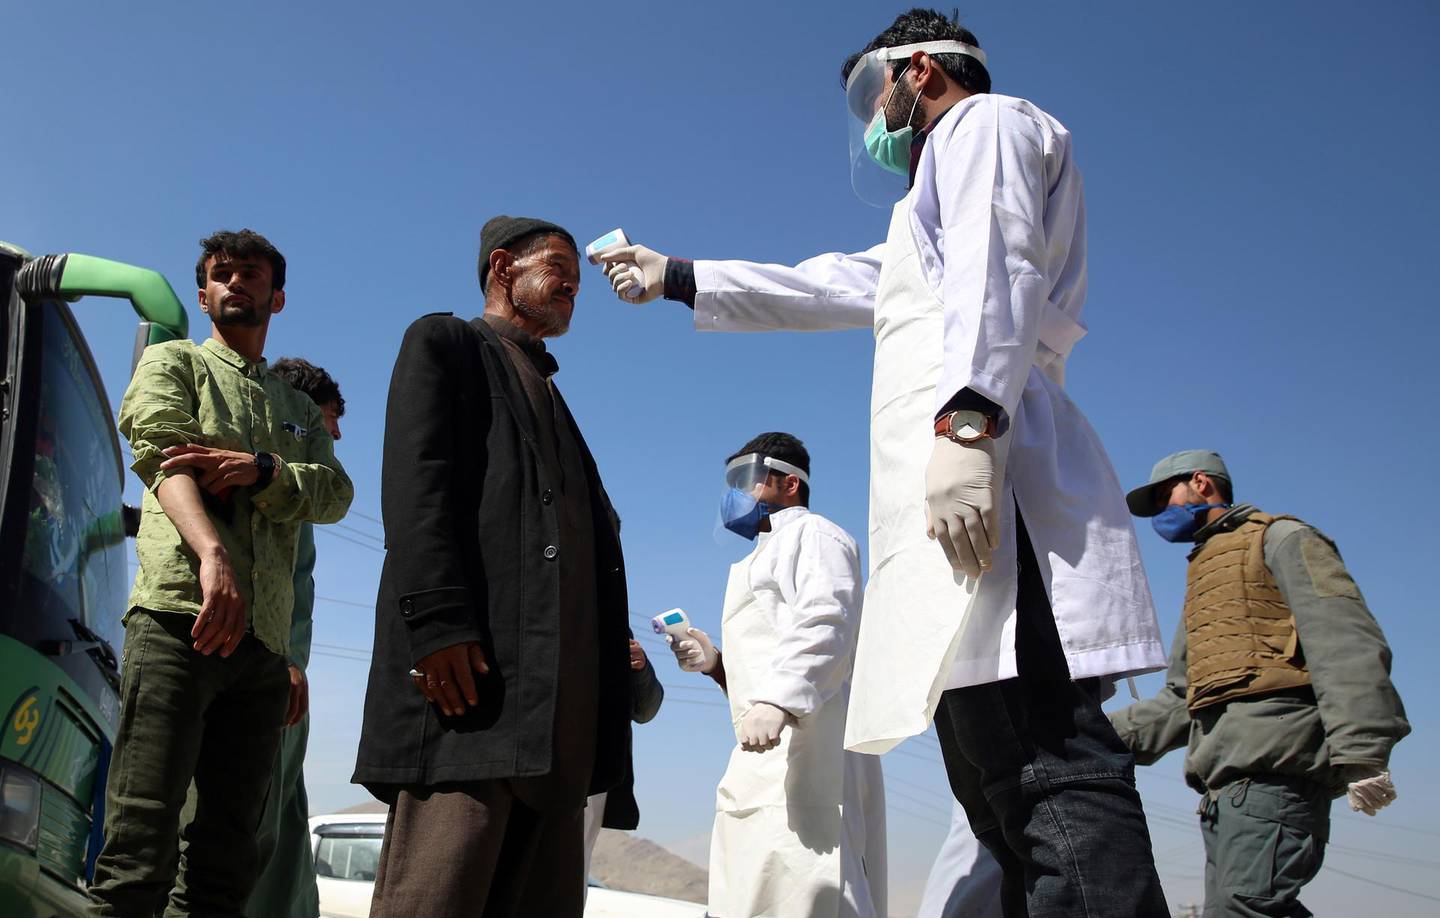 FILE - In this Sunday, March 22, 2020 file photo, health workers measure the temperature of Afghan passengers in an effort to prevent the spread of the coronavirus, as they enter Kabul trough Kabul's western entrance gate, in the Paghman district of Kabul, Afghanistan. Some 200,000 Afghans and counting have returned from Iran to their home country after losing their jobs in the coronavirus pandemic or out of fear of getting infected. They are flowing across the border from a country that has one of the world's worst outbreak to an impoverished nation that is woefully unprepared to deal with the virus. (AP Photo/Rahmat Gul, File)